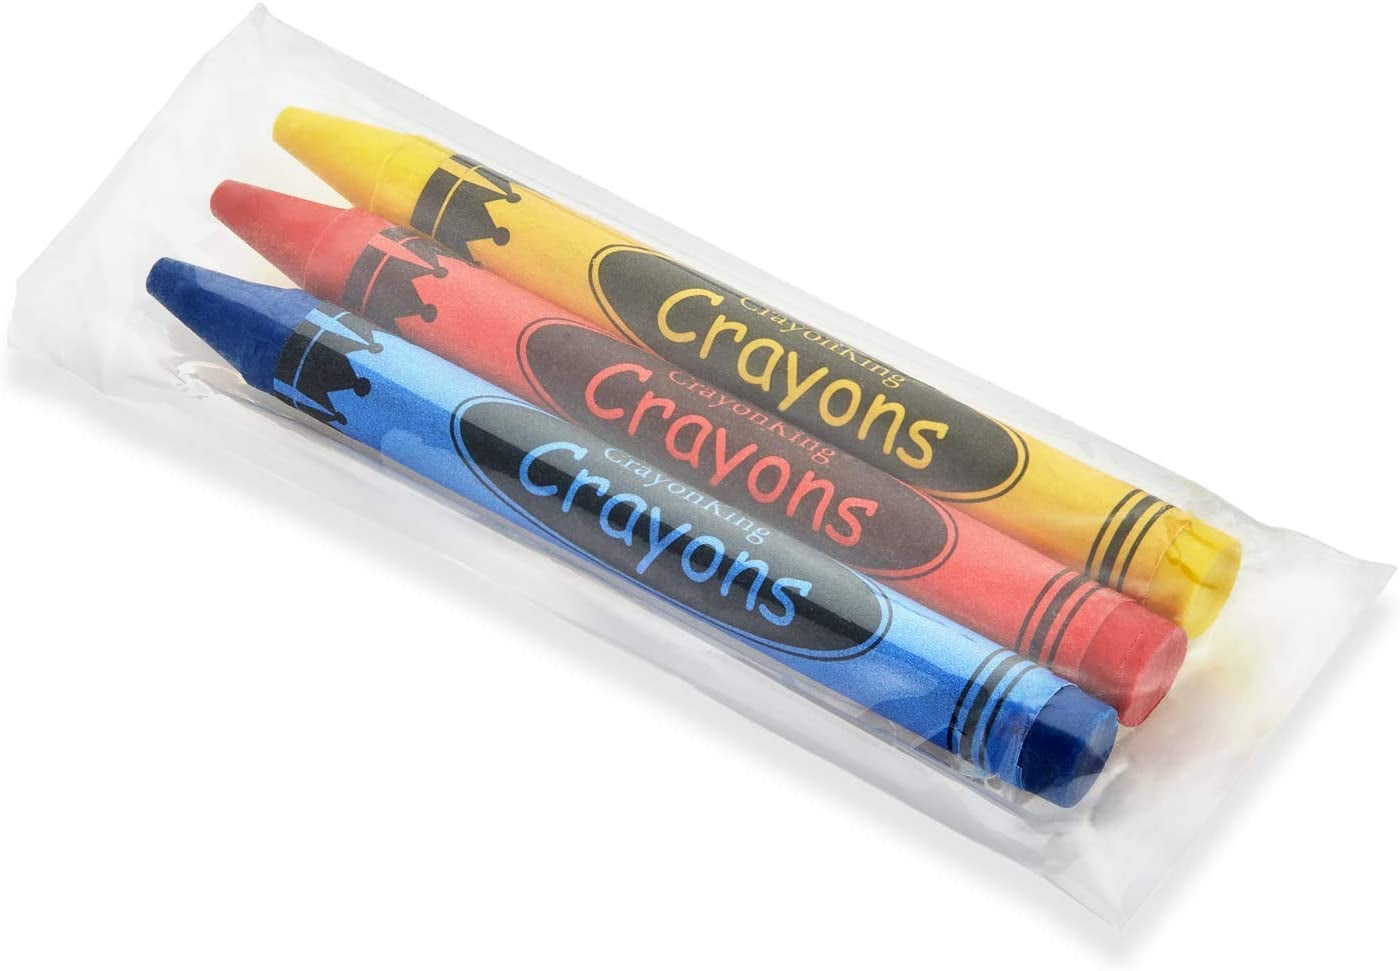 Download Crayon King 720 Bulk Crayons (240 Sets of 3-Packs in Cello) Restaurants, Party Favors, Birthdays ...